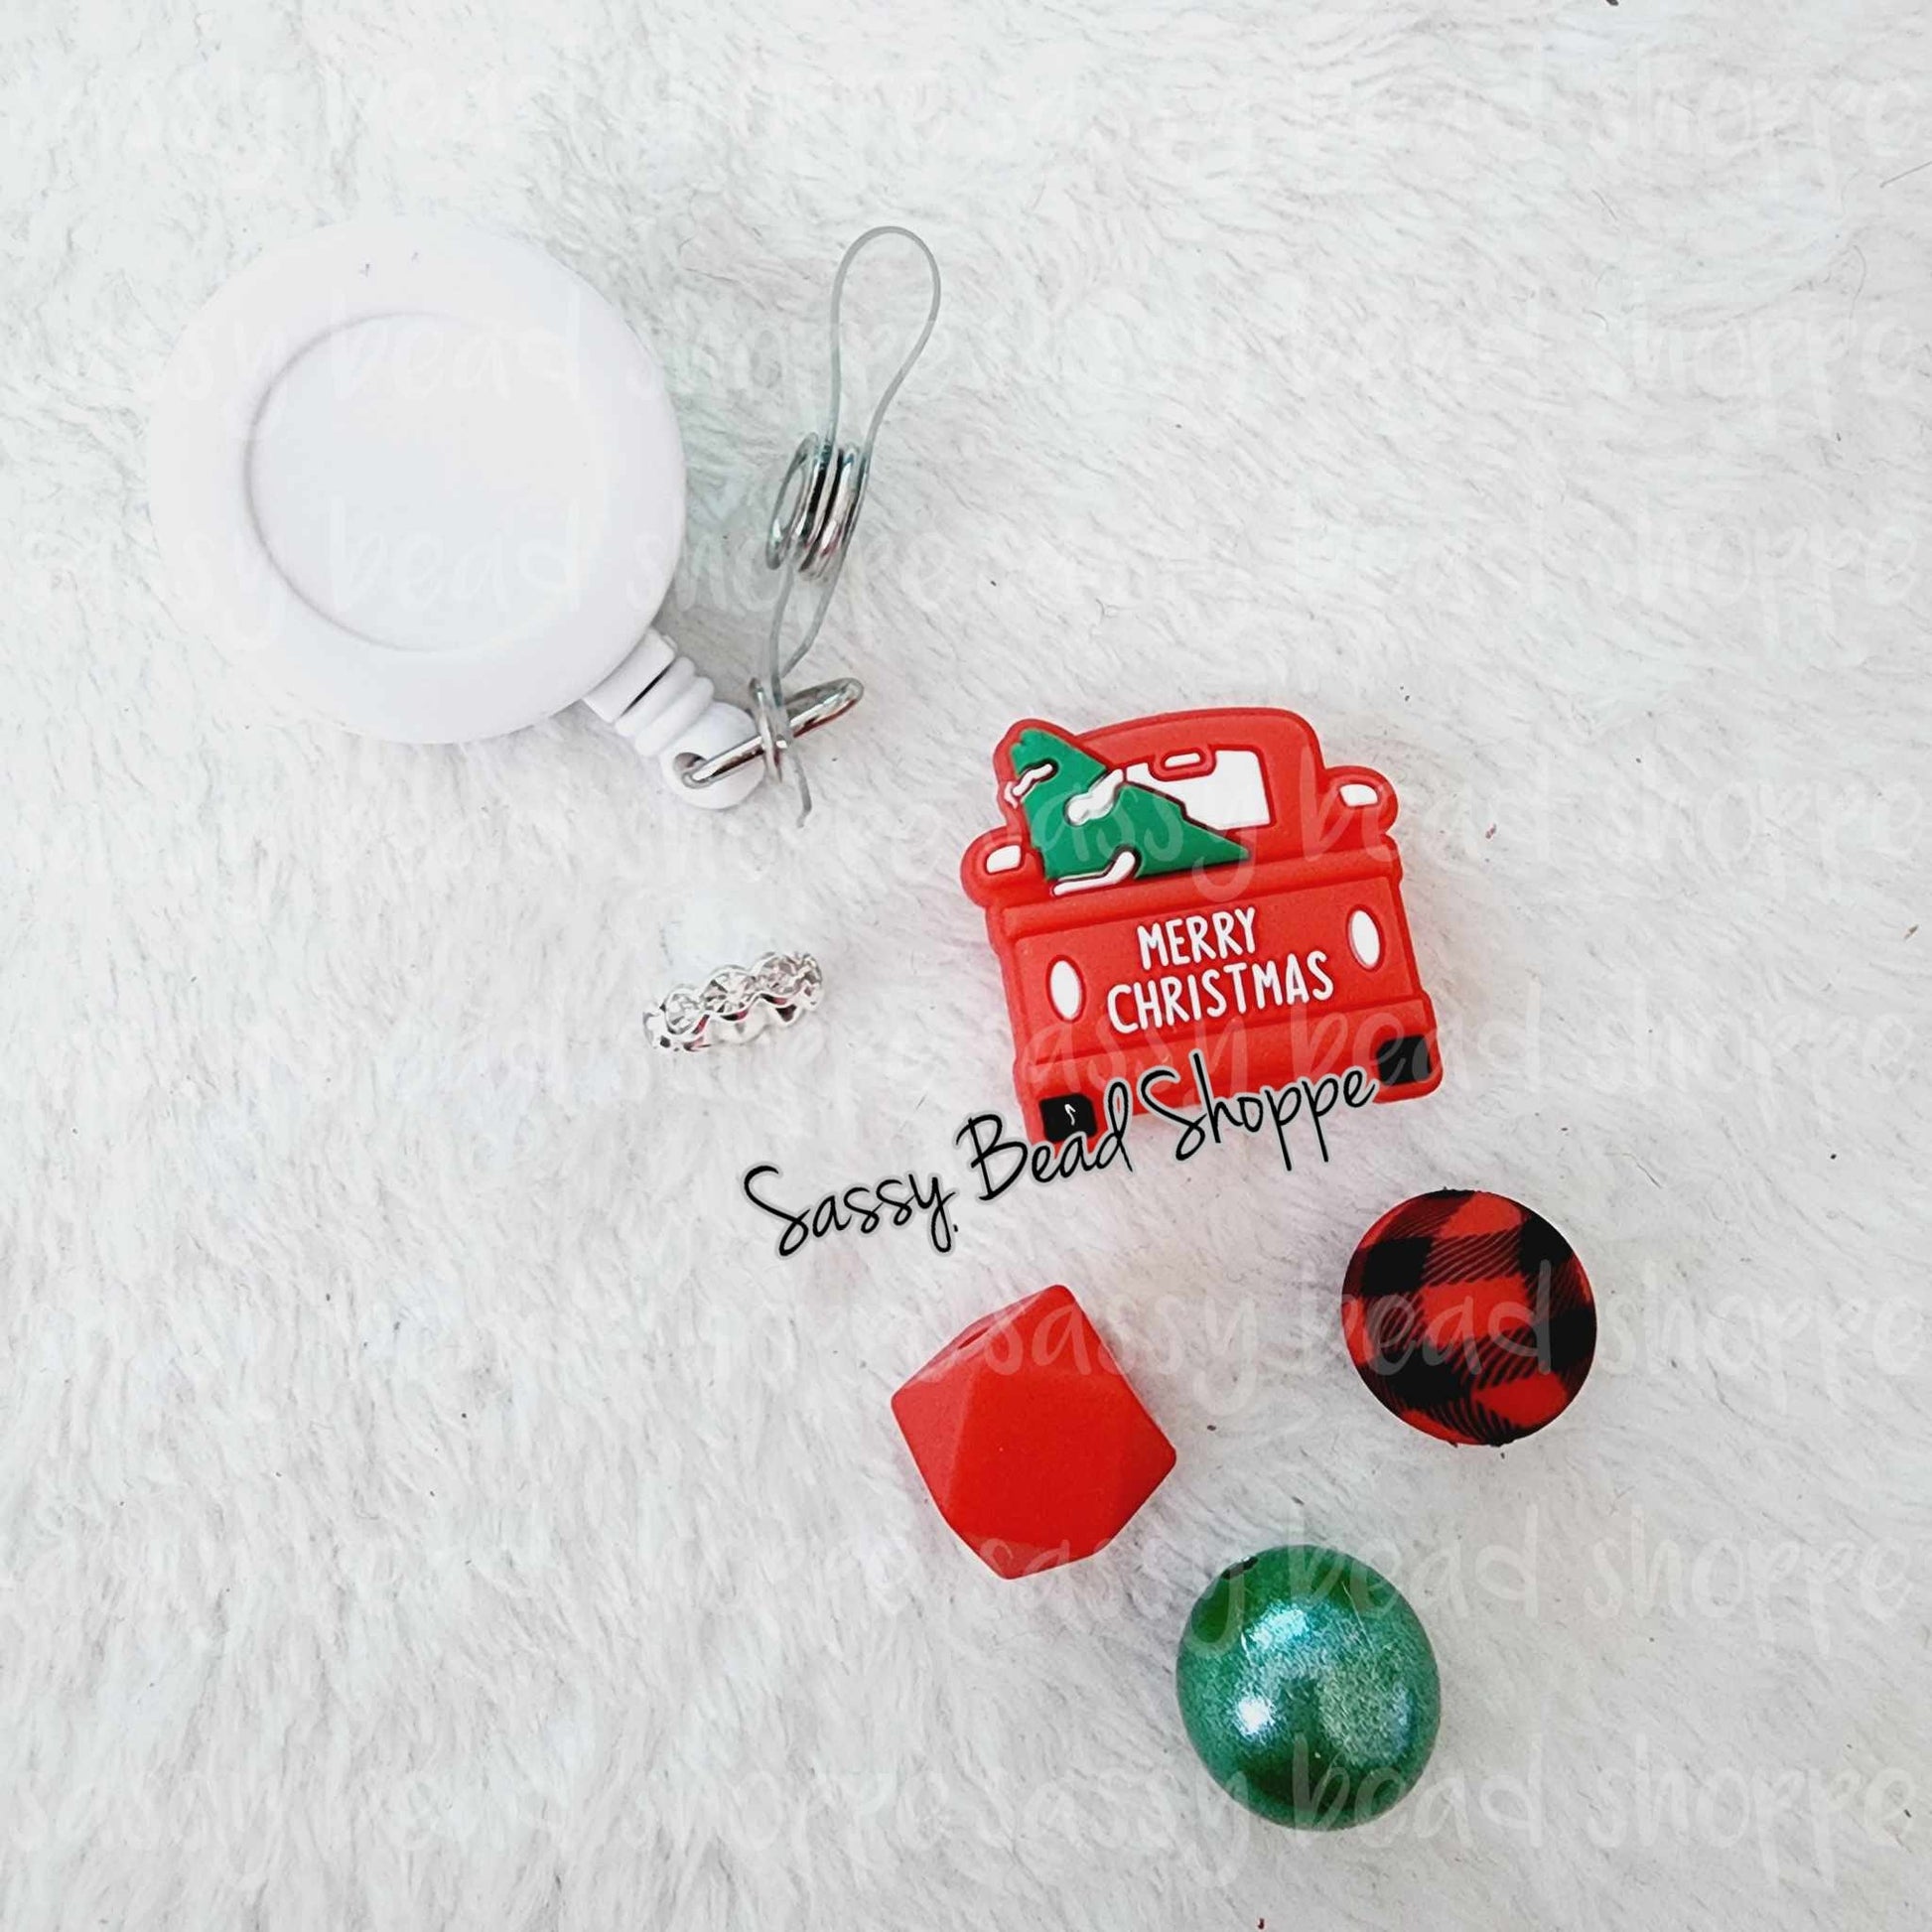 Sassy Bead Shoppe Merry Christmas Badge Reel What you will receive in your kit